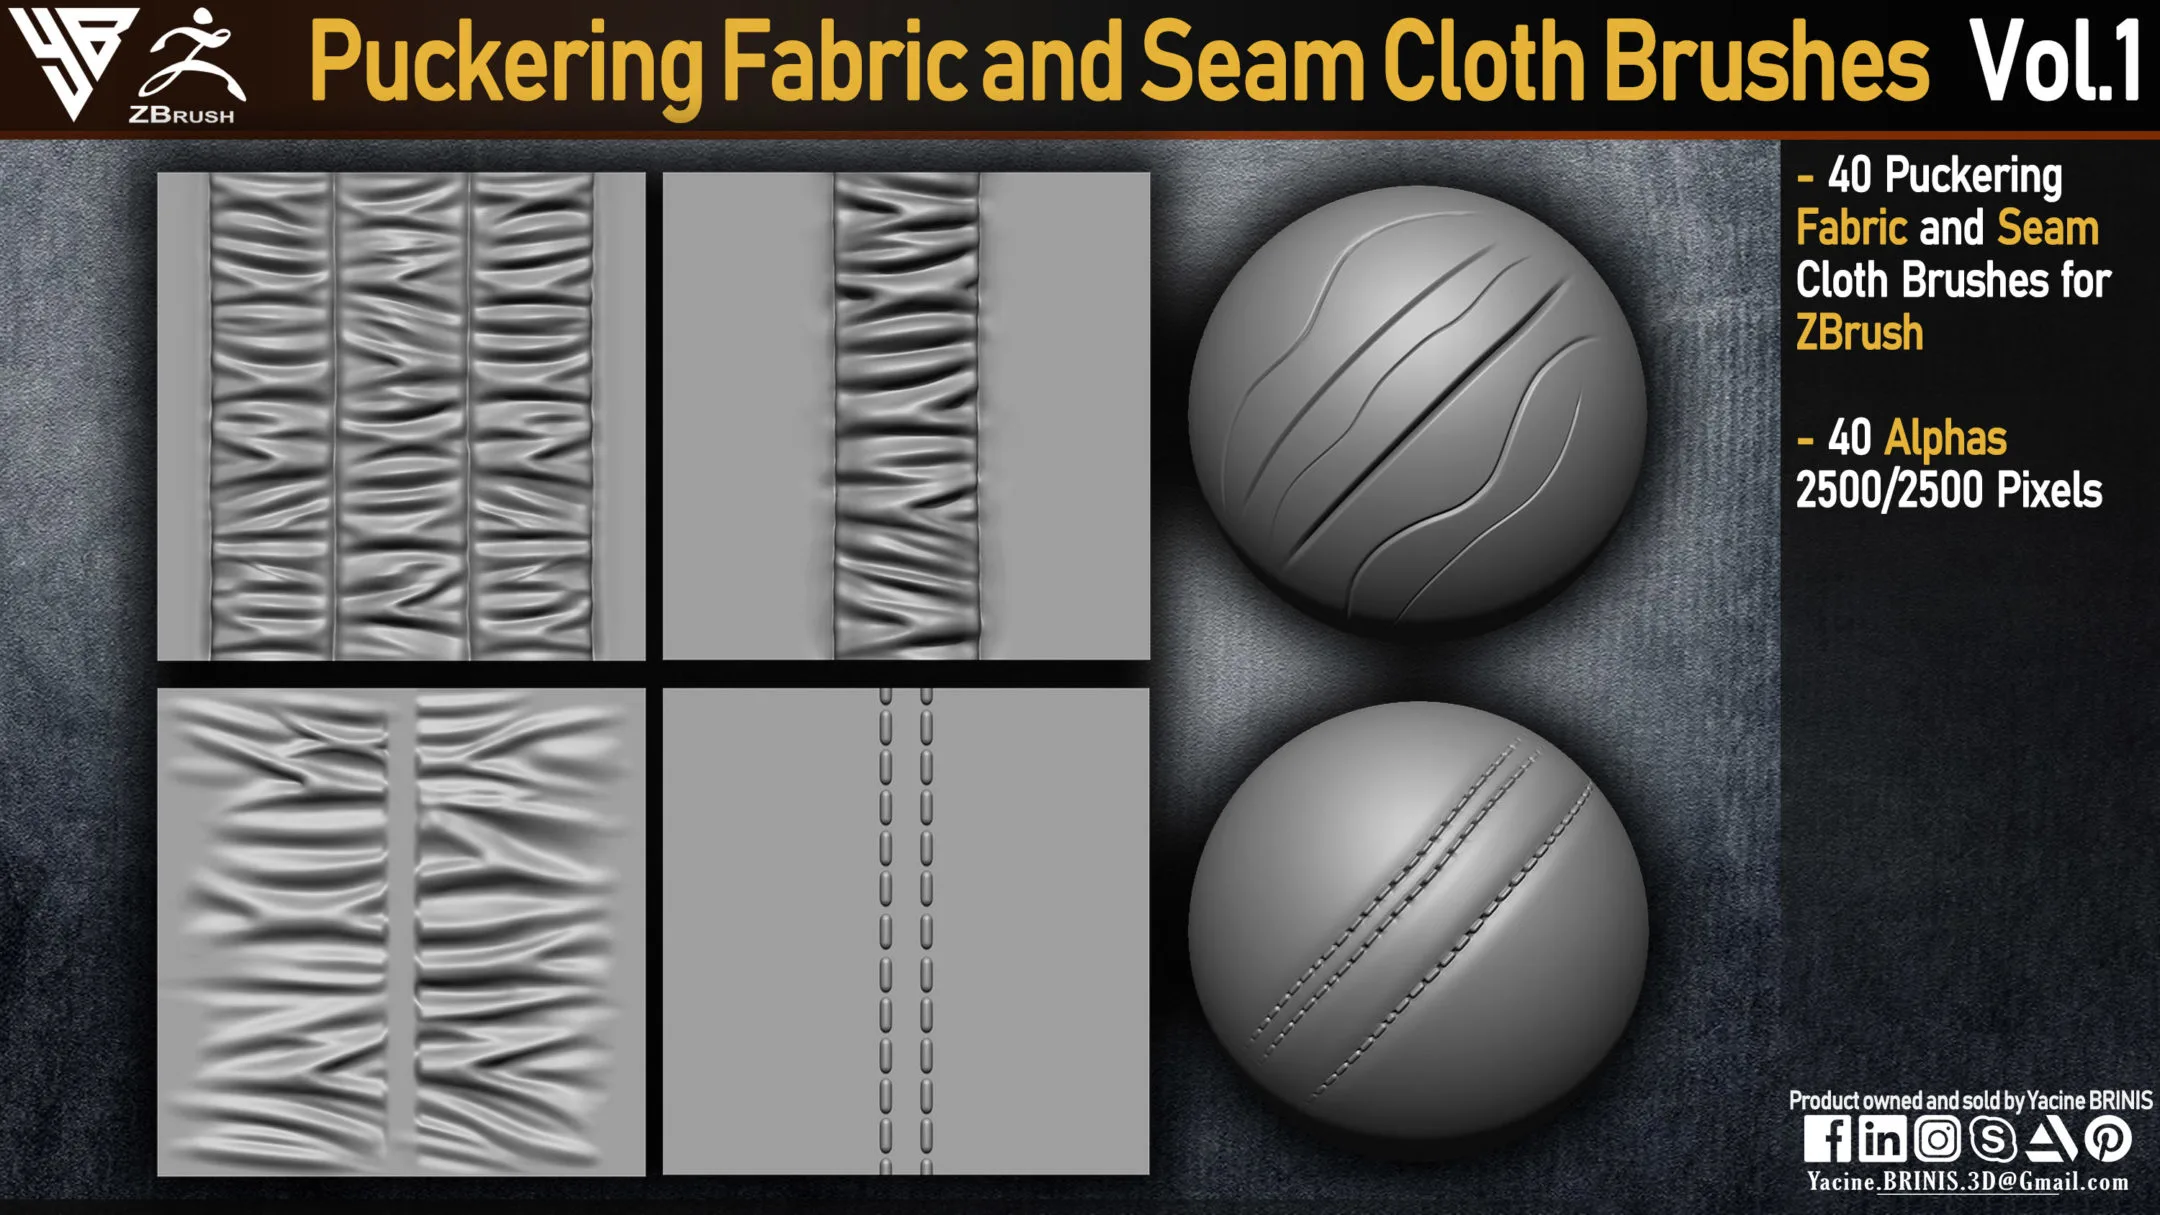 Puckering Fabric and Seam Cloth Brushes for ZBrush (Stitching)